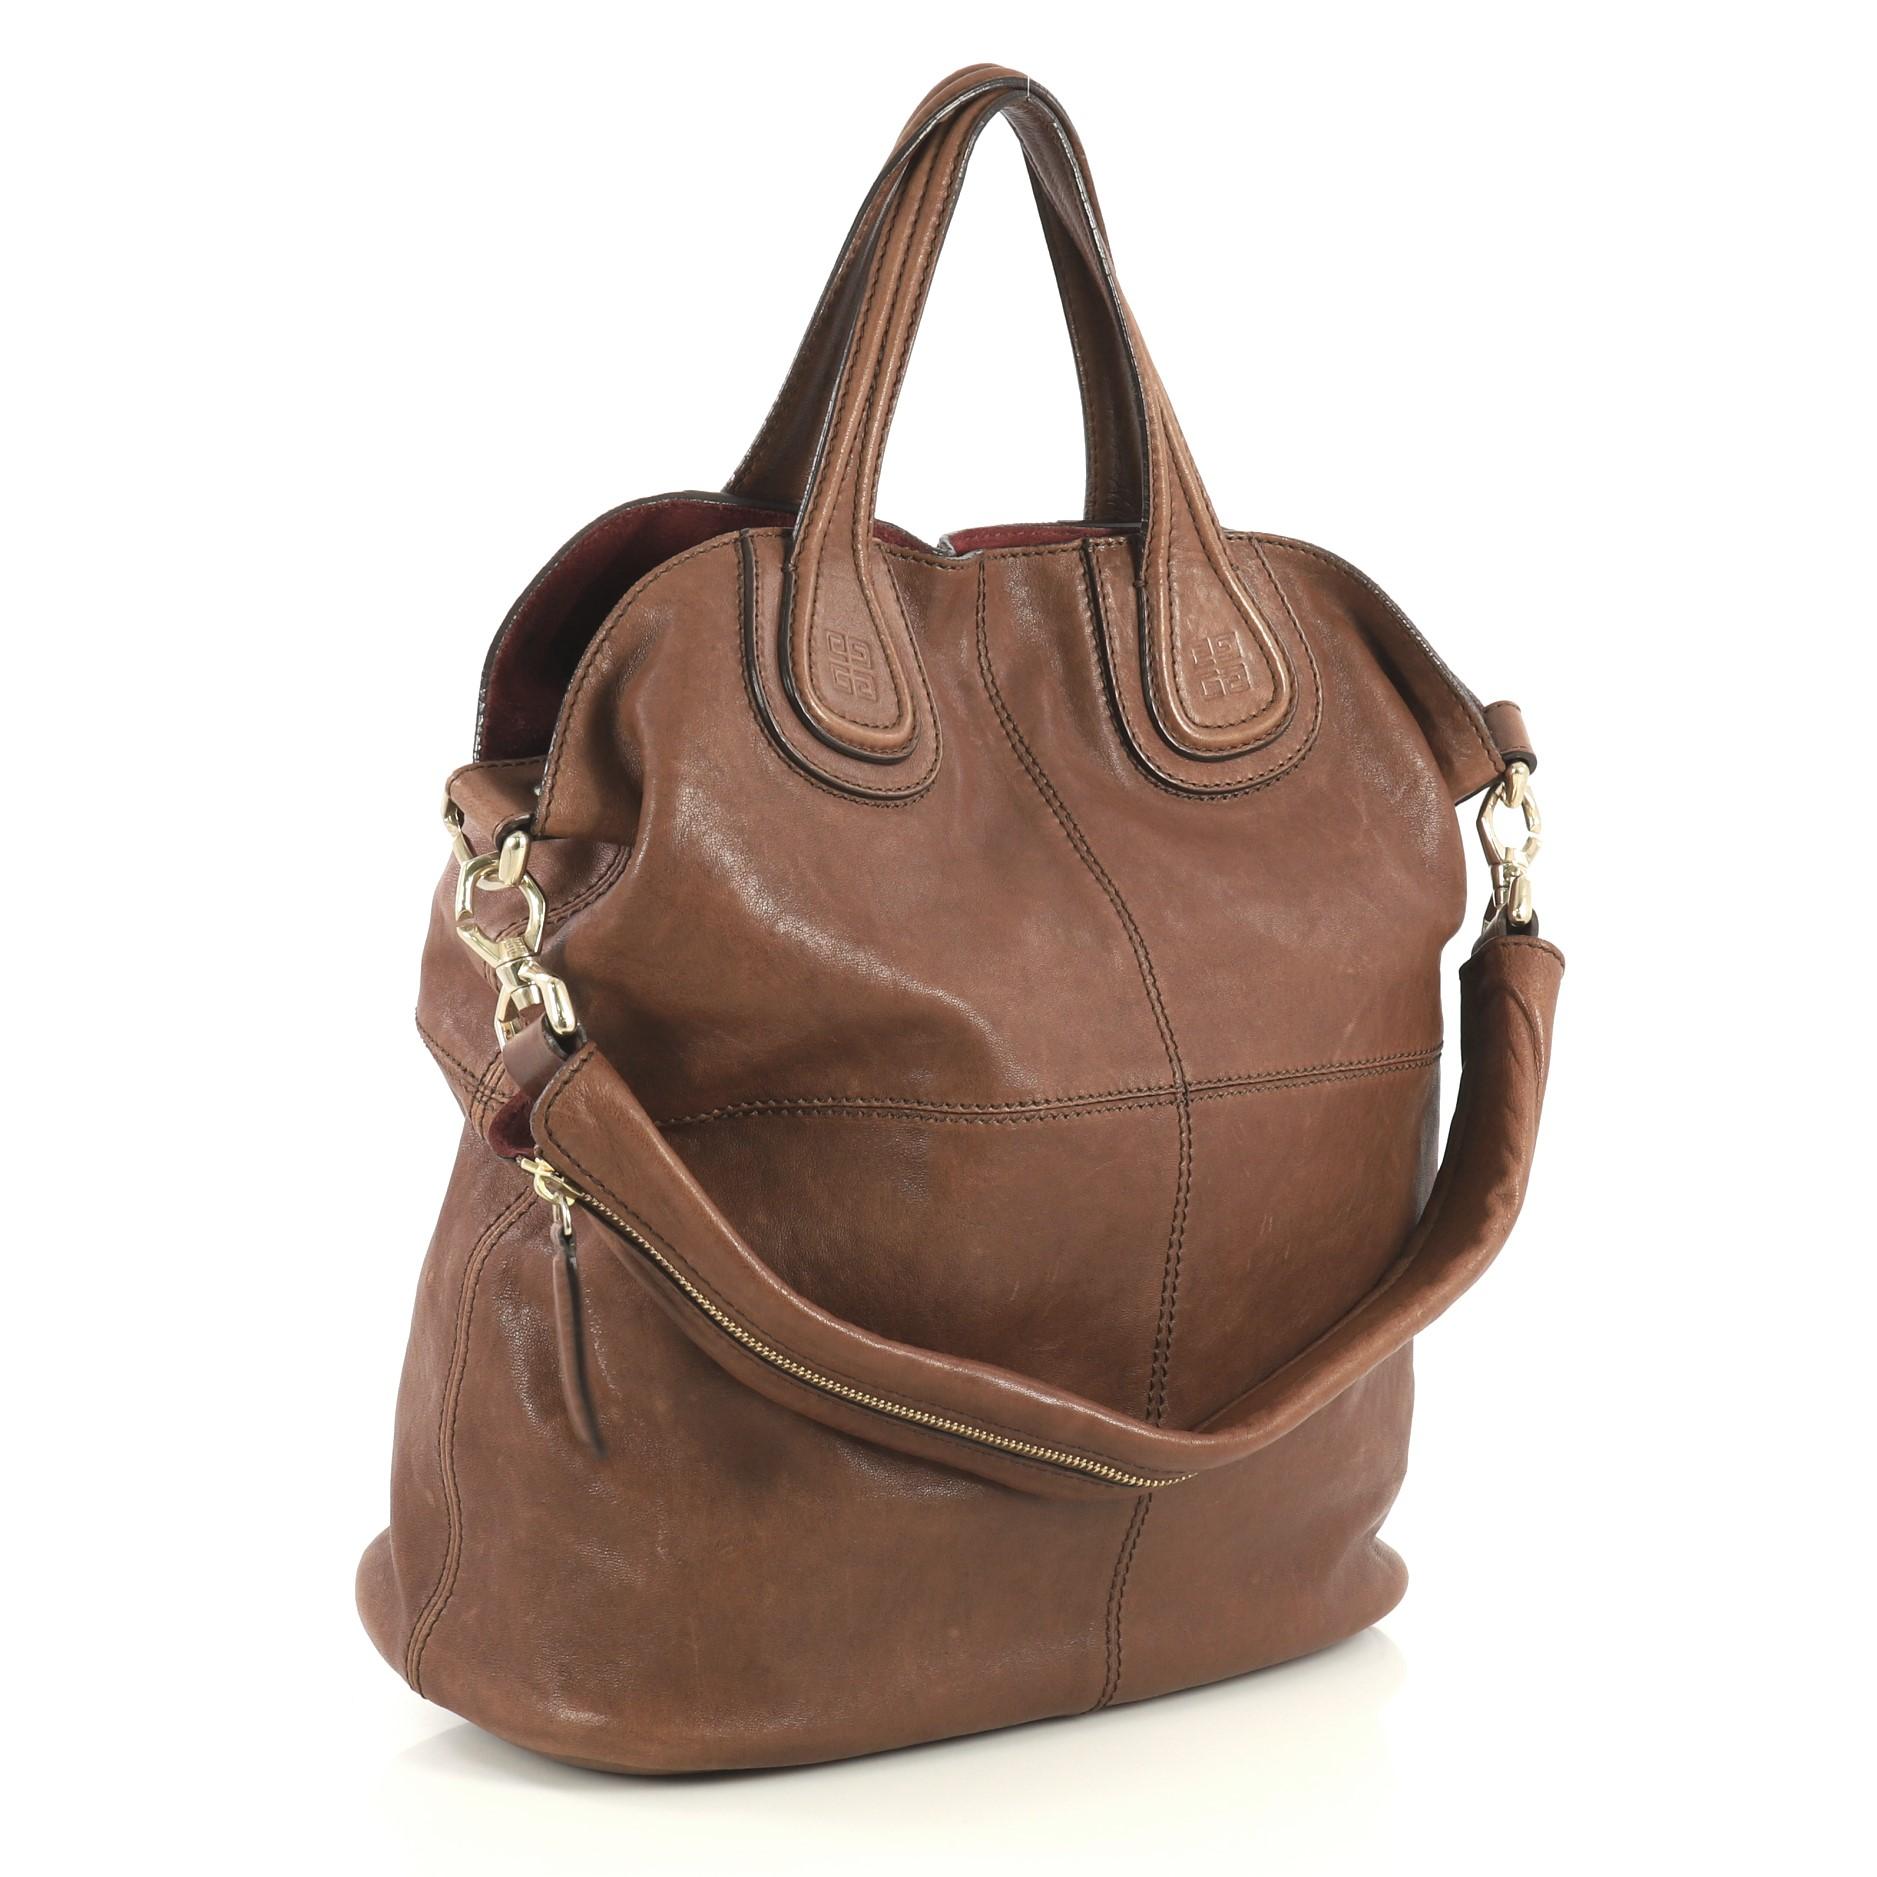 This Givenchy Nightingale Tote Leather Large, crafted in brown leather, features dual top handles with embossed Givenchy logo, stitched quarters, and gold-tone hardware. Its hidden magnetic closure opens to a black fabric interior with zip and slip